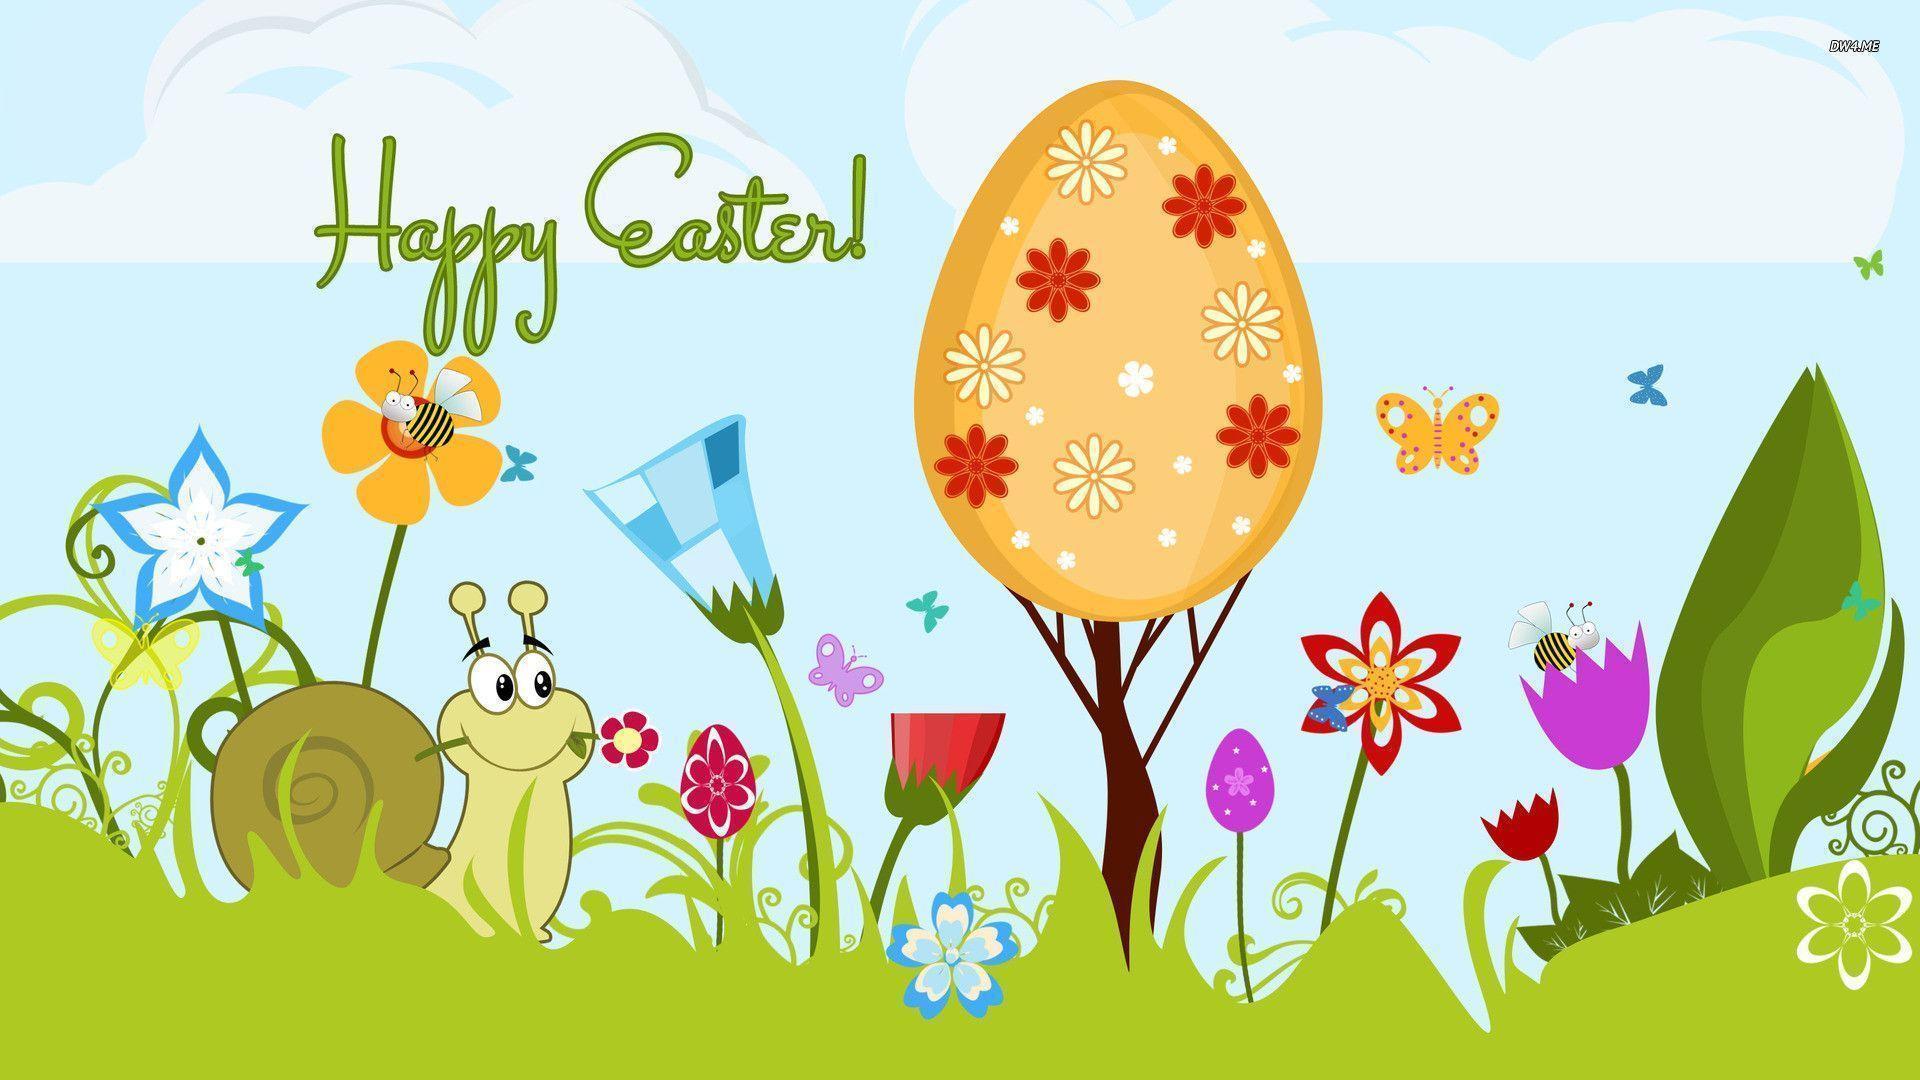 Happy Easter! wallpapers